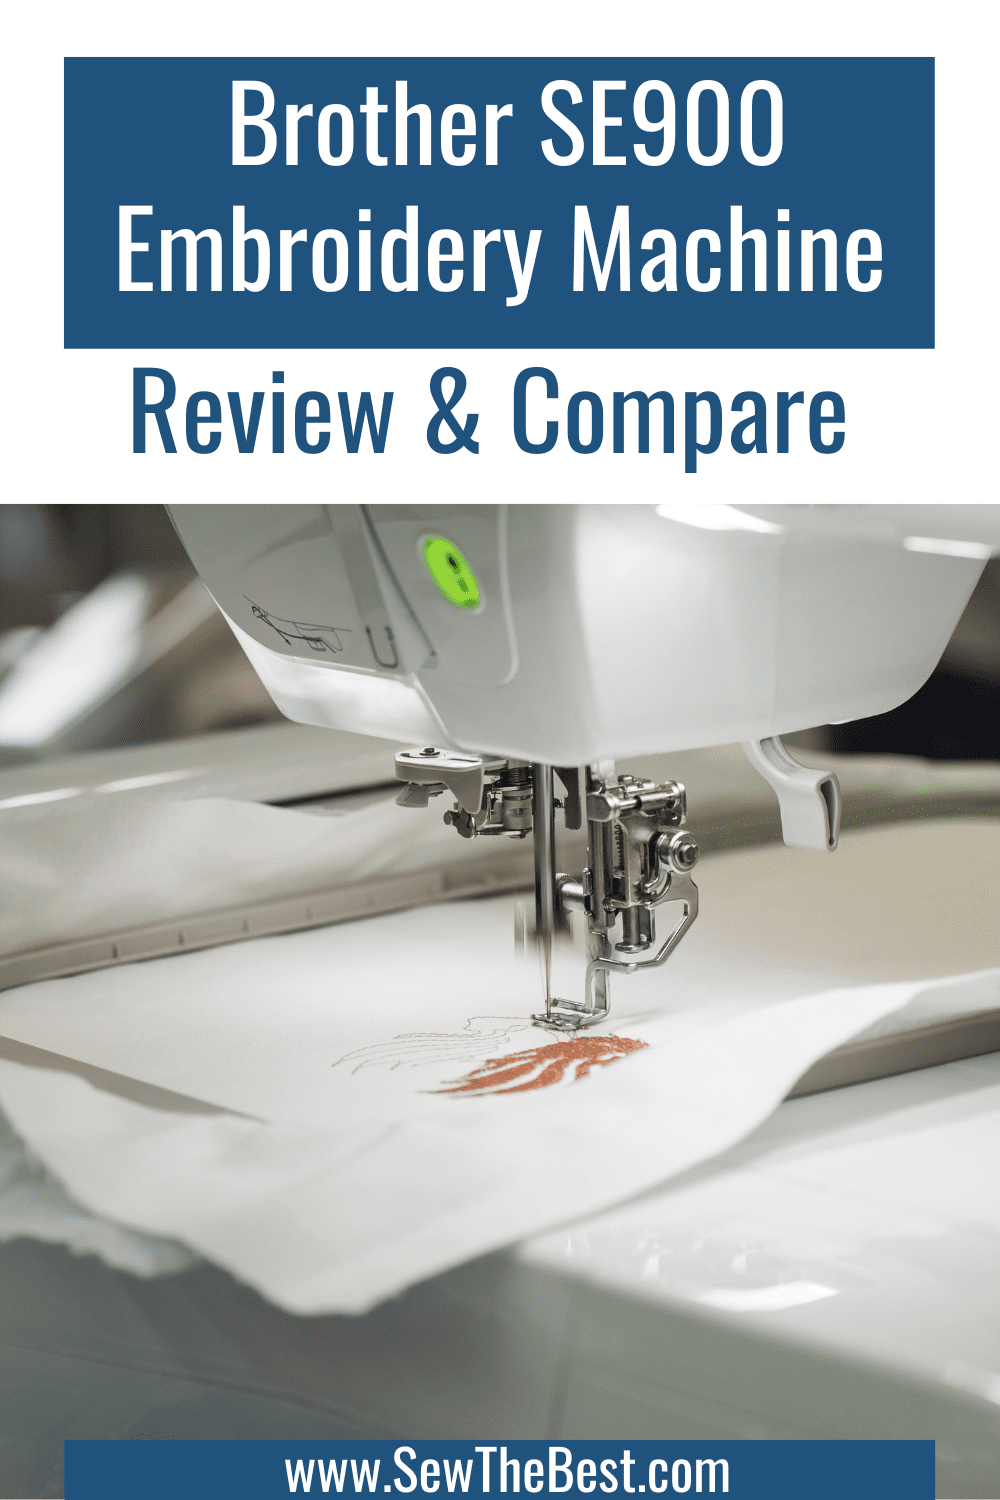 Brother SE900 Embroidery Machine Review & Compare. Picture of Brother embroidery machine embroidering follows.